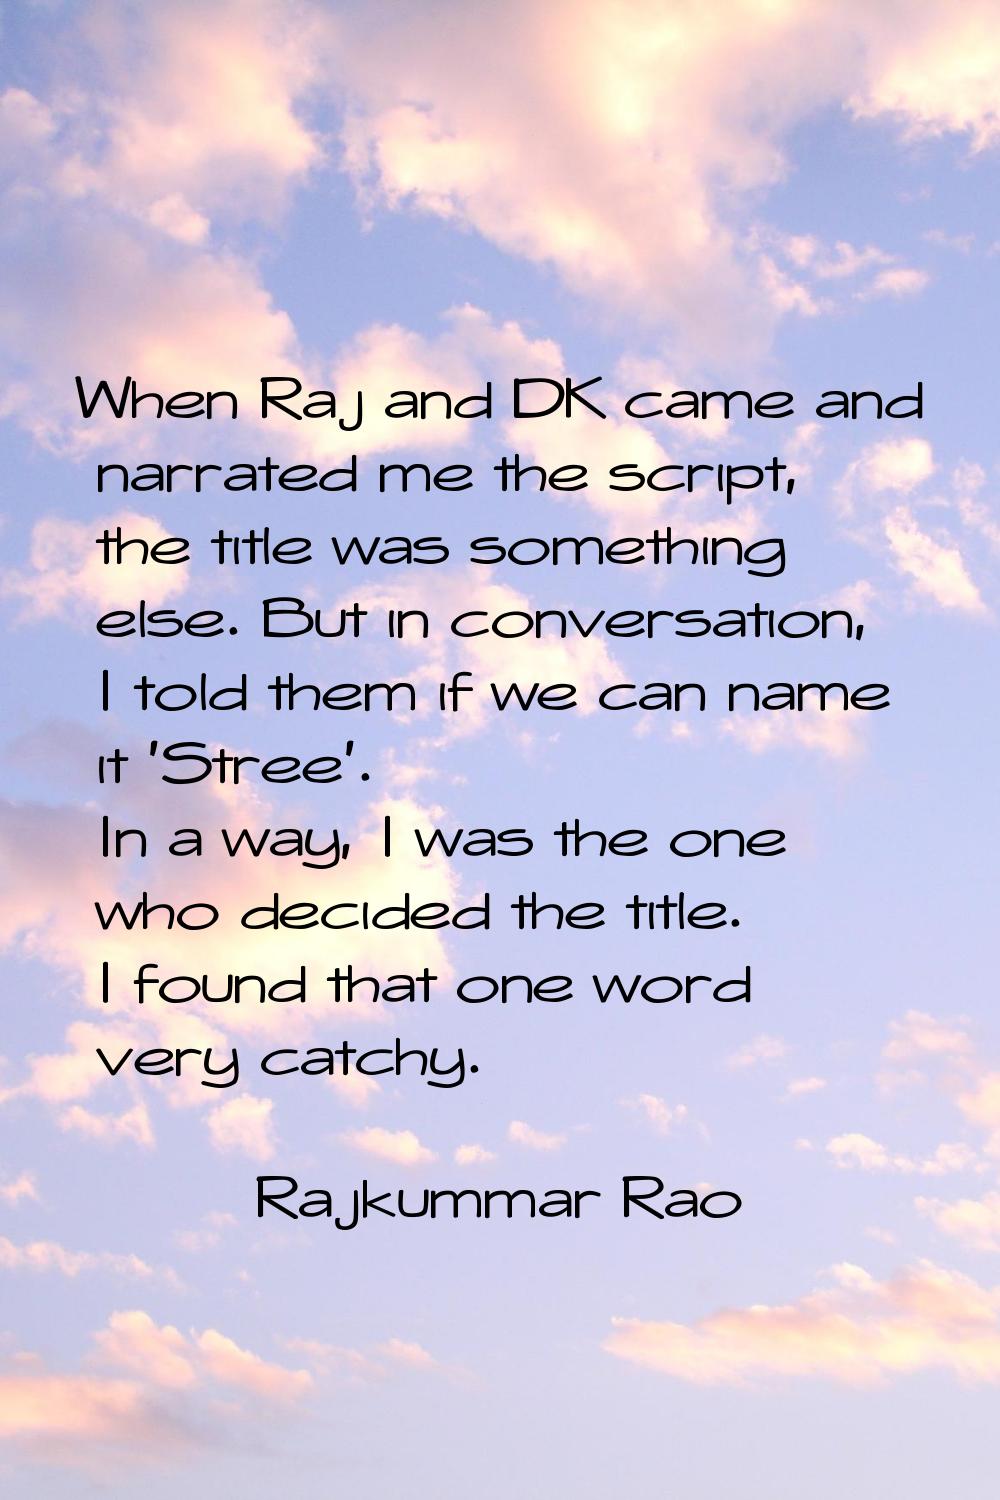 When Raj and DK came and narrated me the script, the title was something else. But in conversation,